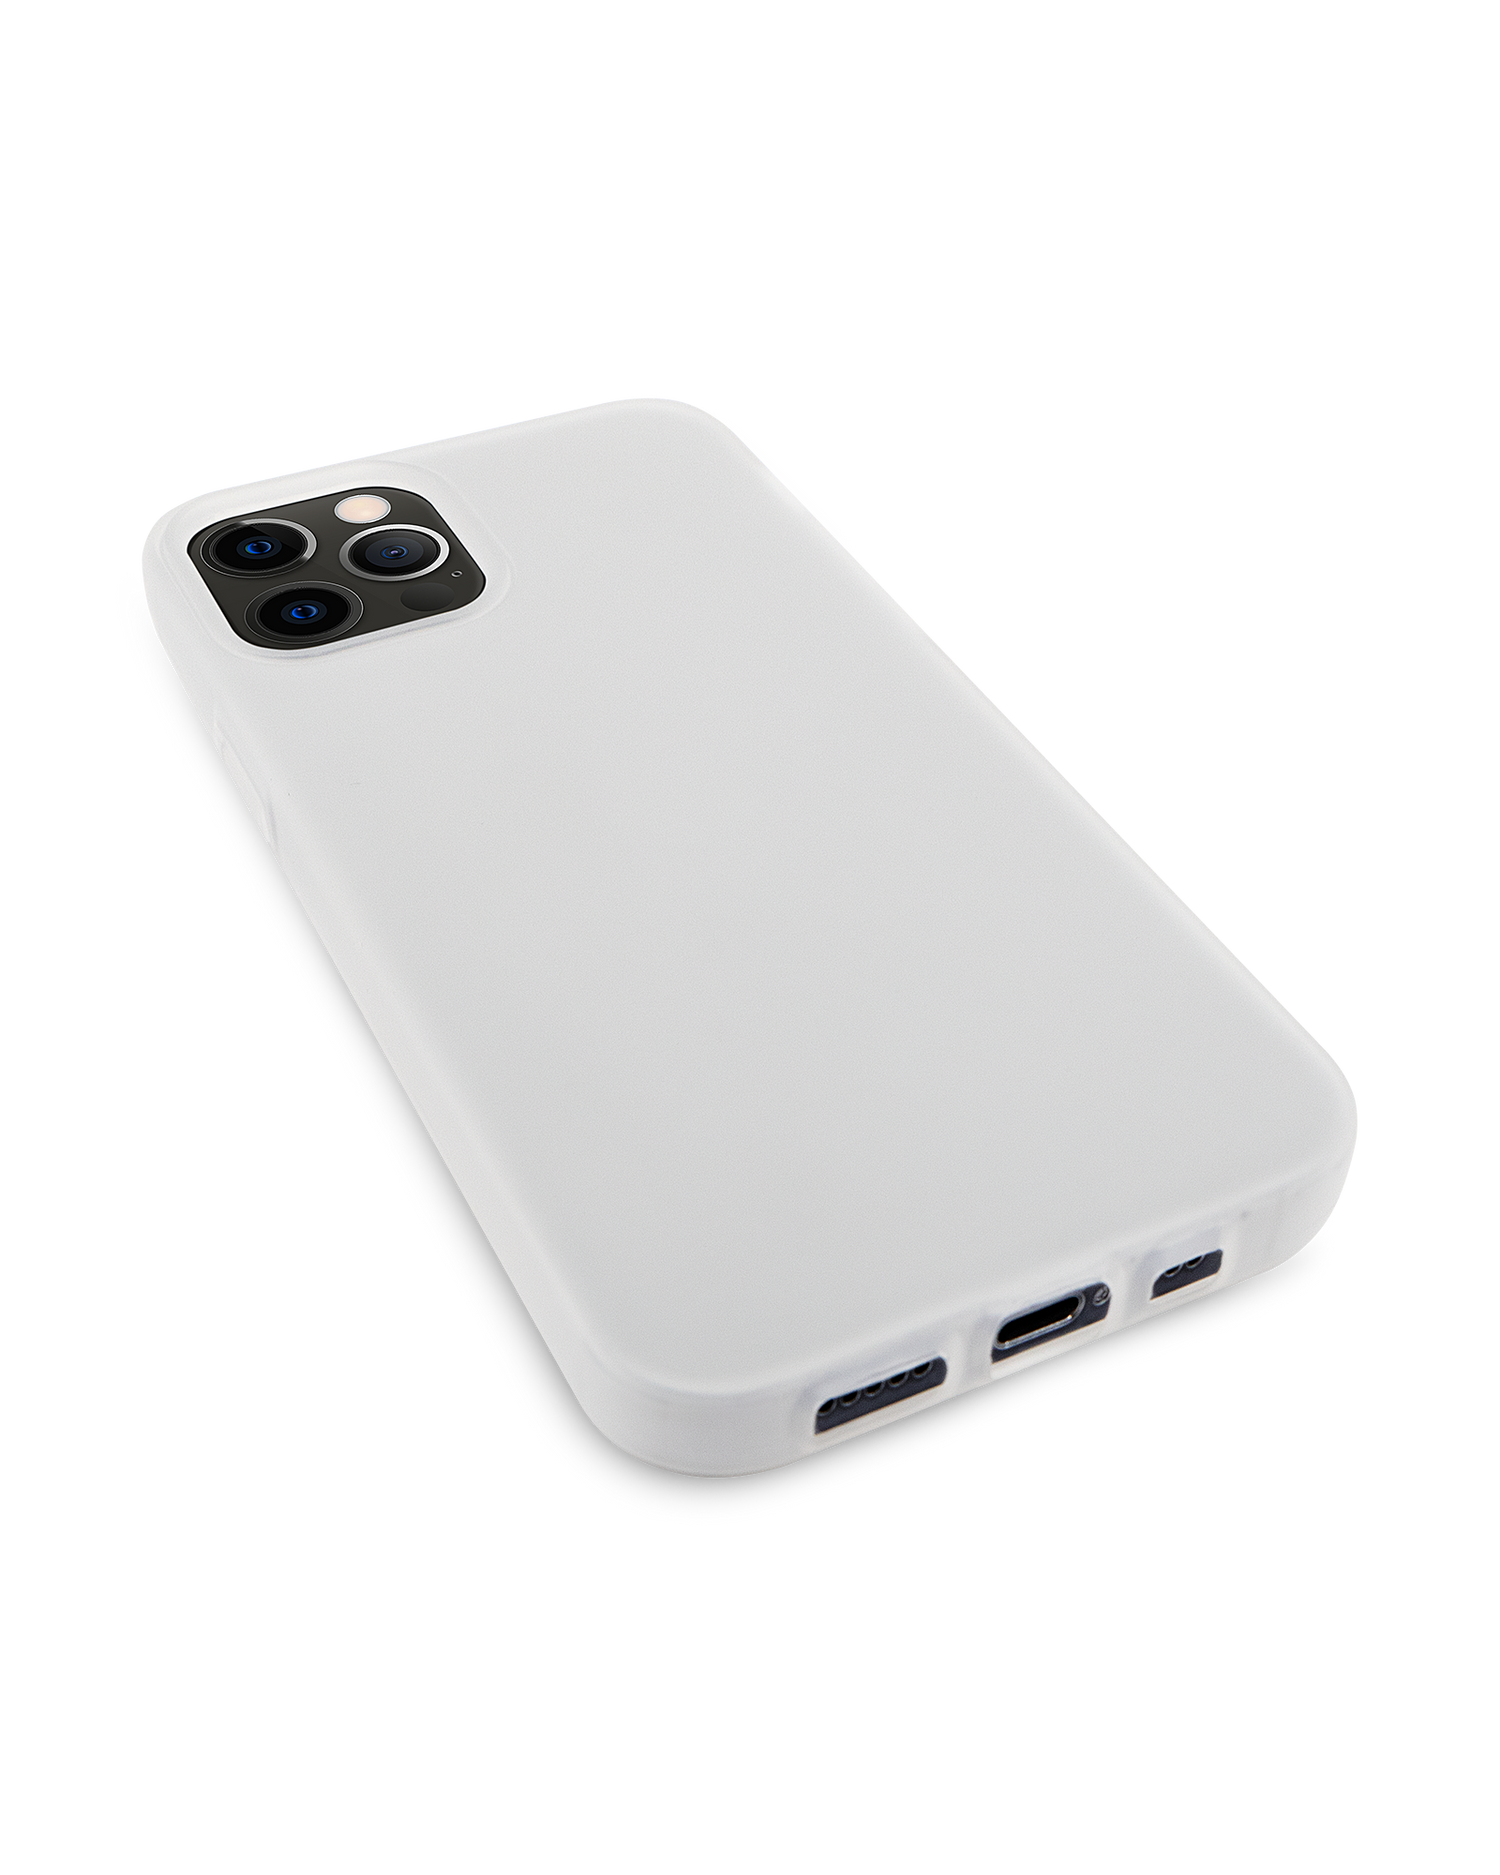 Recycled Silicone Phone Case for iPhone 12 & iPhone 12 Pro: Bottom view